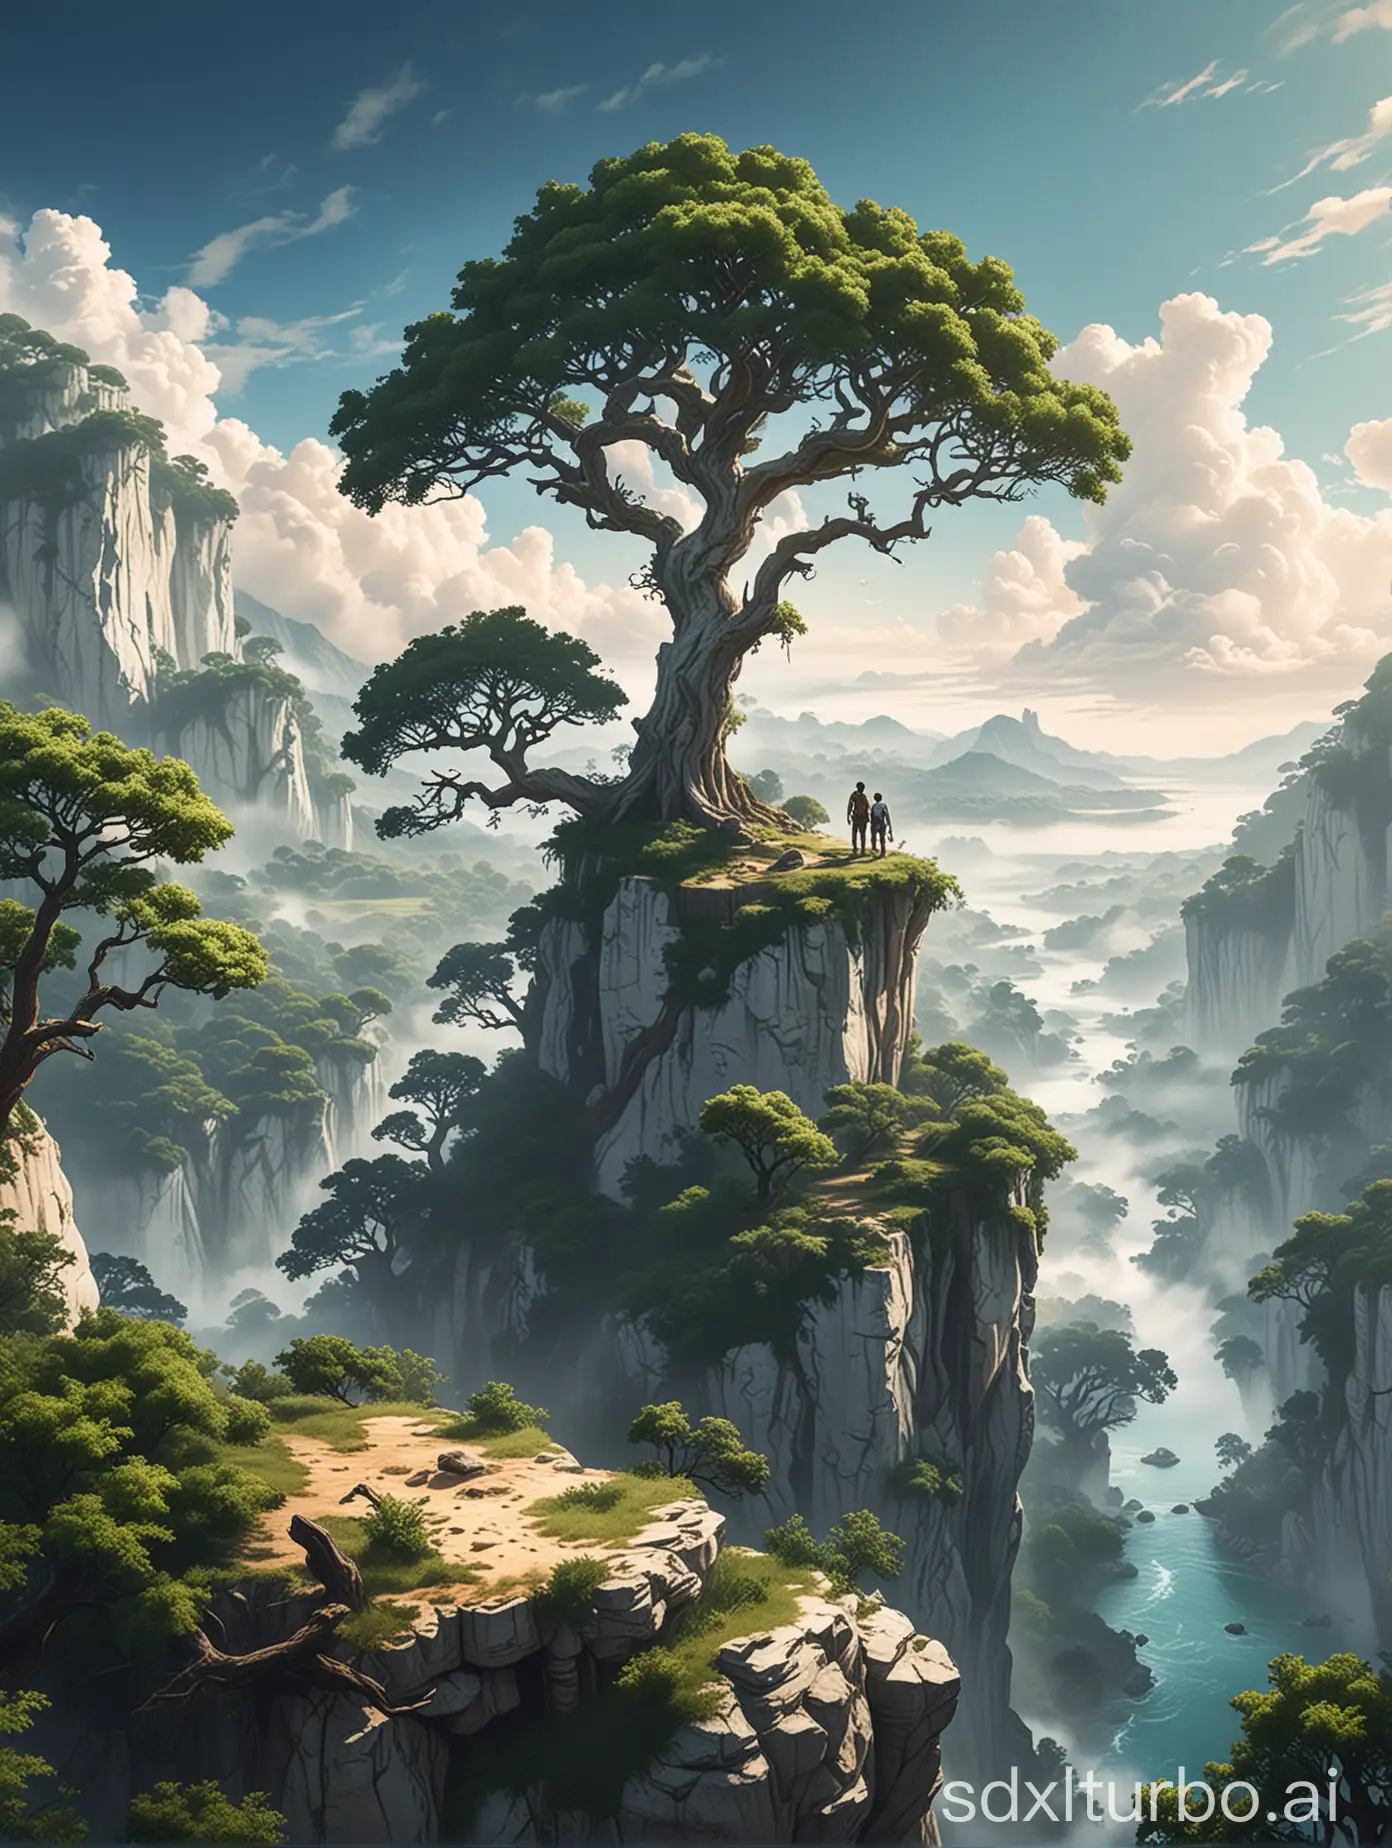 Uncharted game art style, a towering white cliff, on top is a huge Oak tree,far below is river covered by fog, ed anime style of fluffy white clouds,wide angle,vibrant